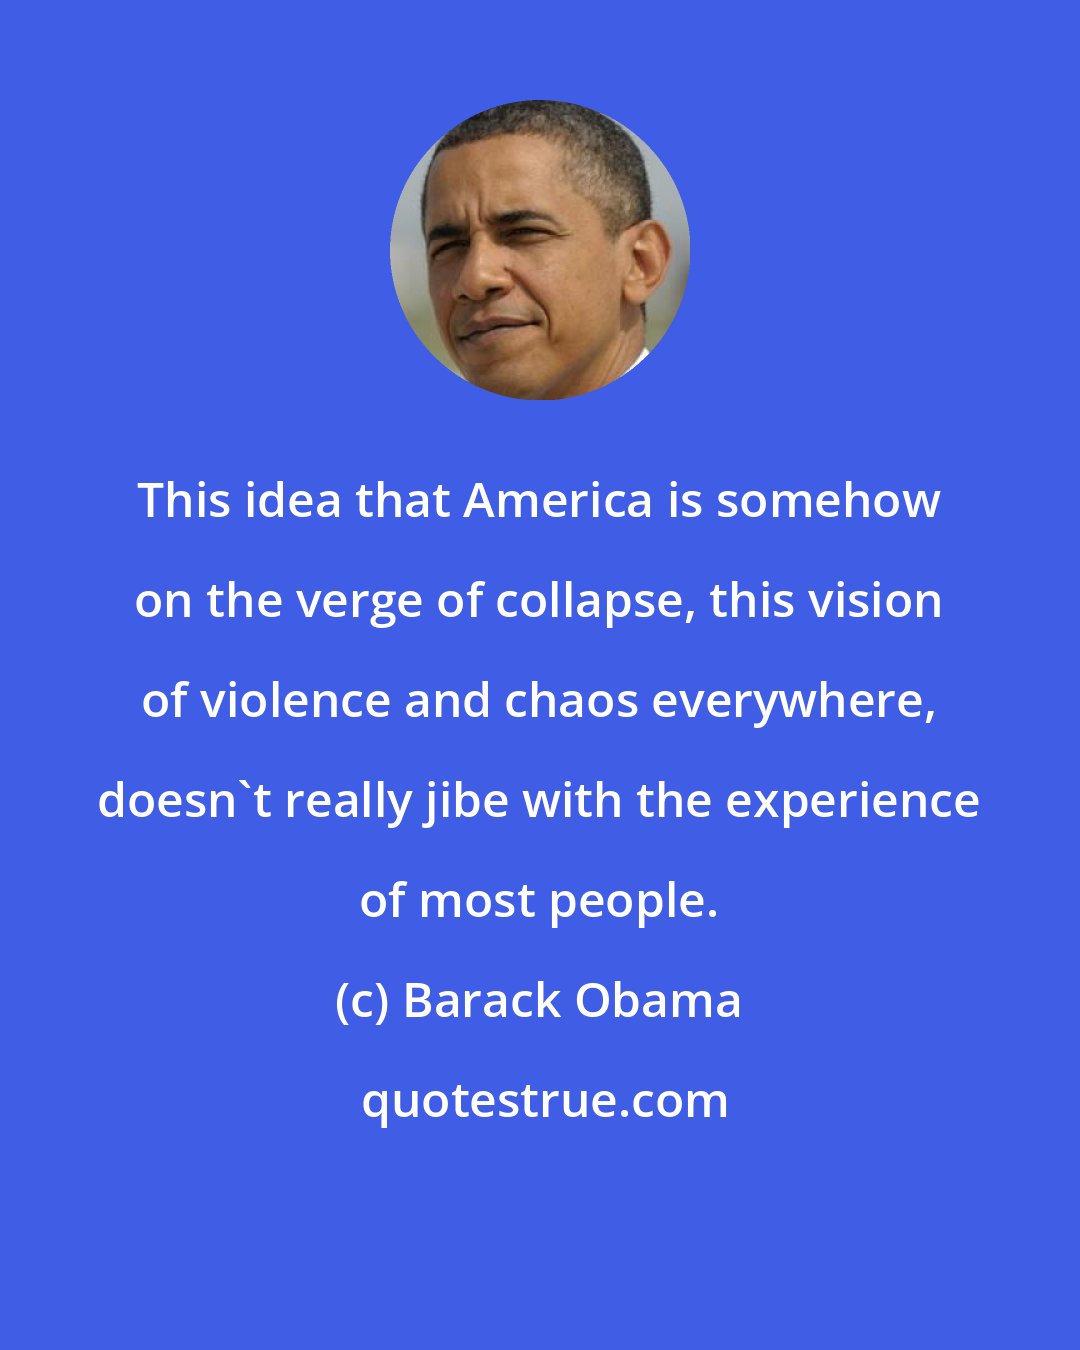 Barack Obama: This idea that America is somehow on the verge of collapse, this vision of violence and chaos everywhere, doesn't really jibe with the experience of most people.